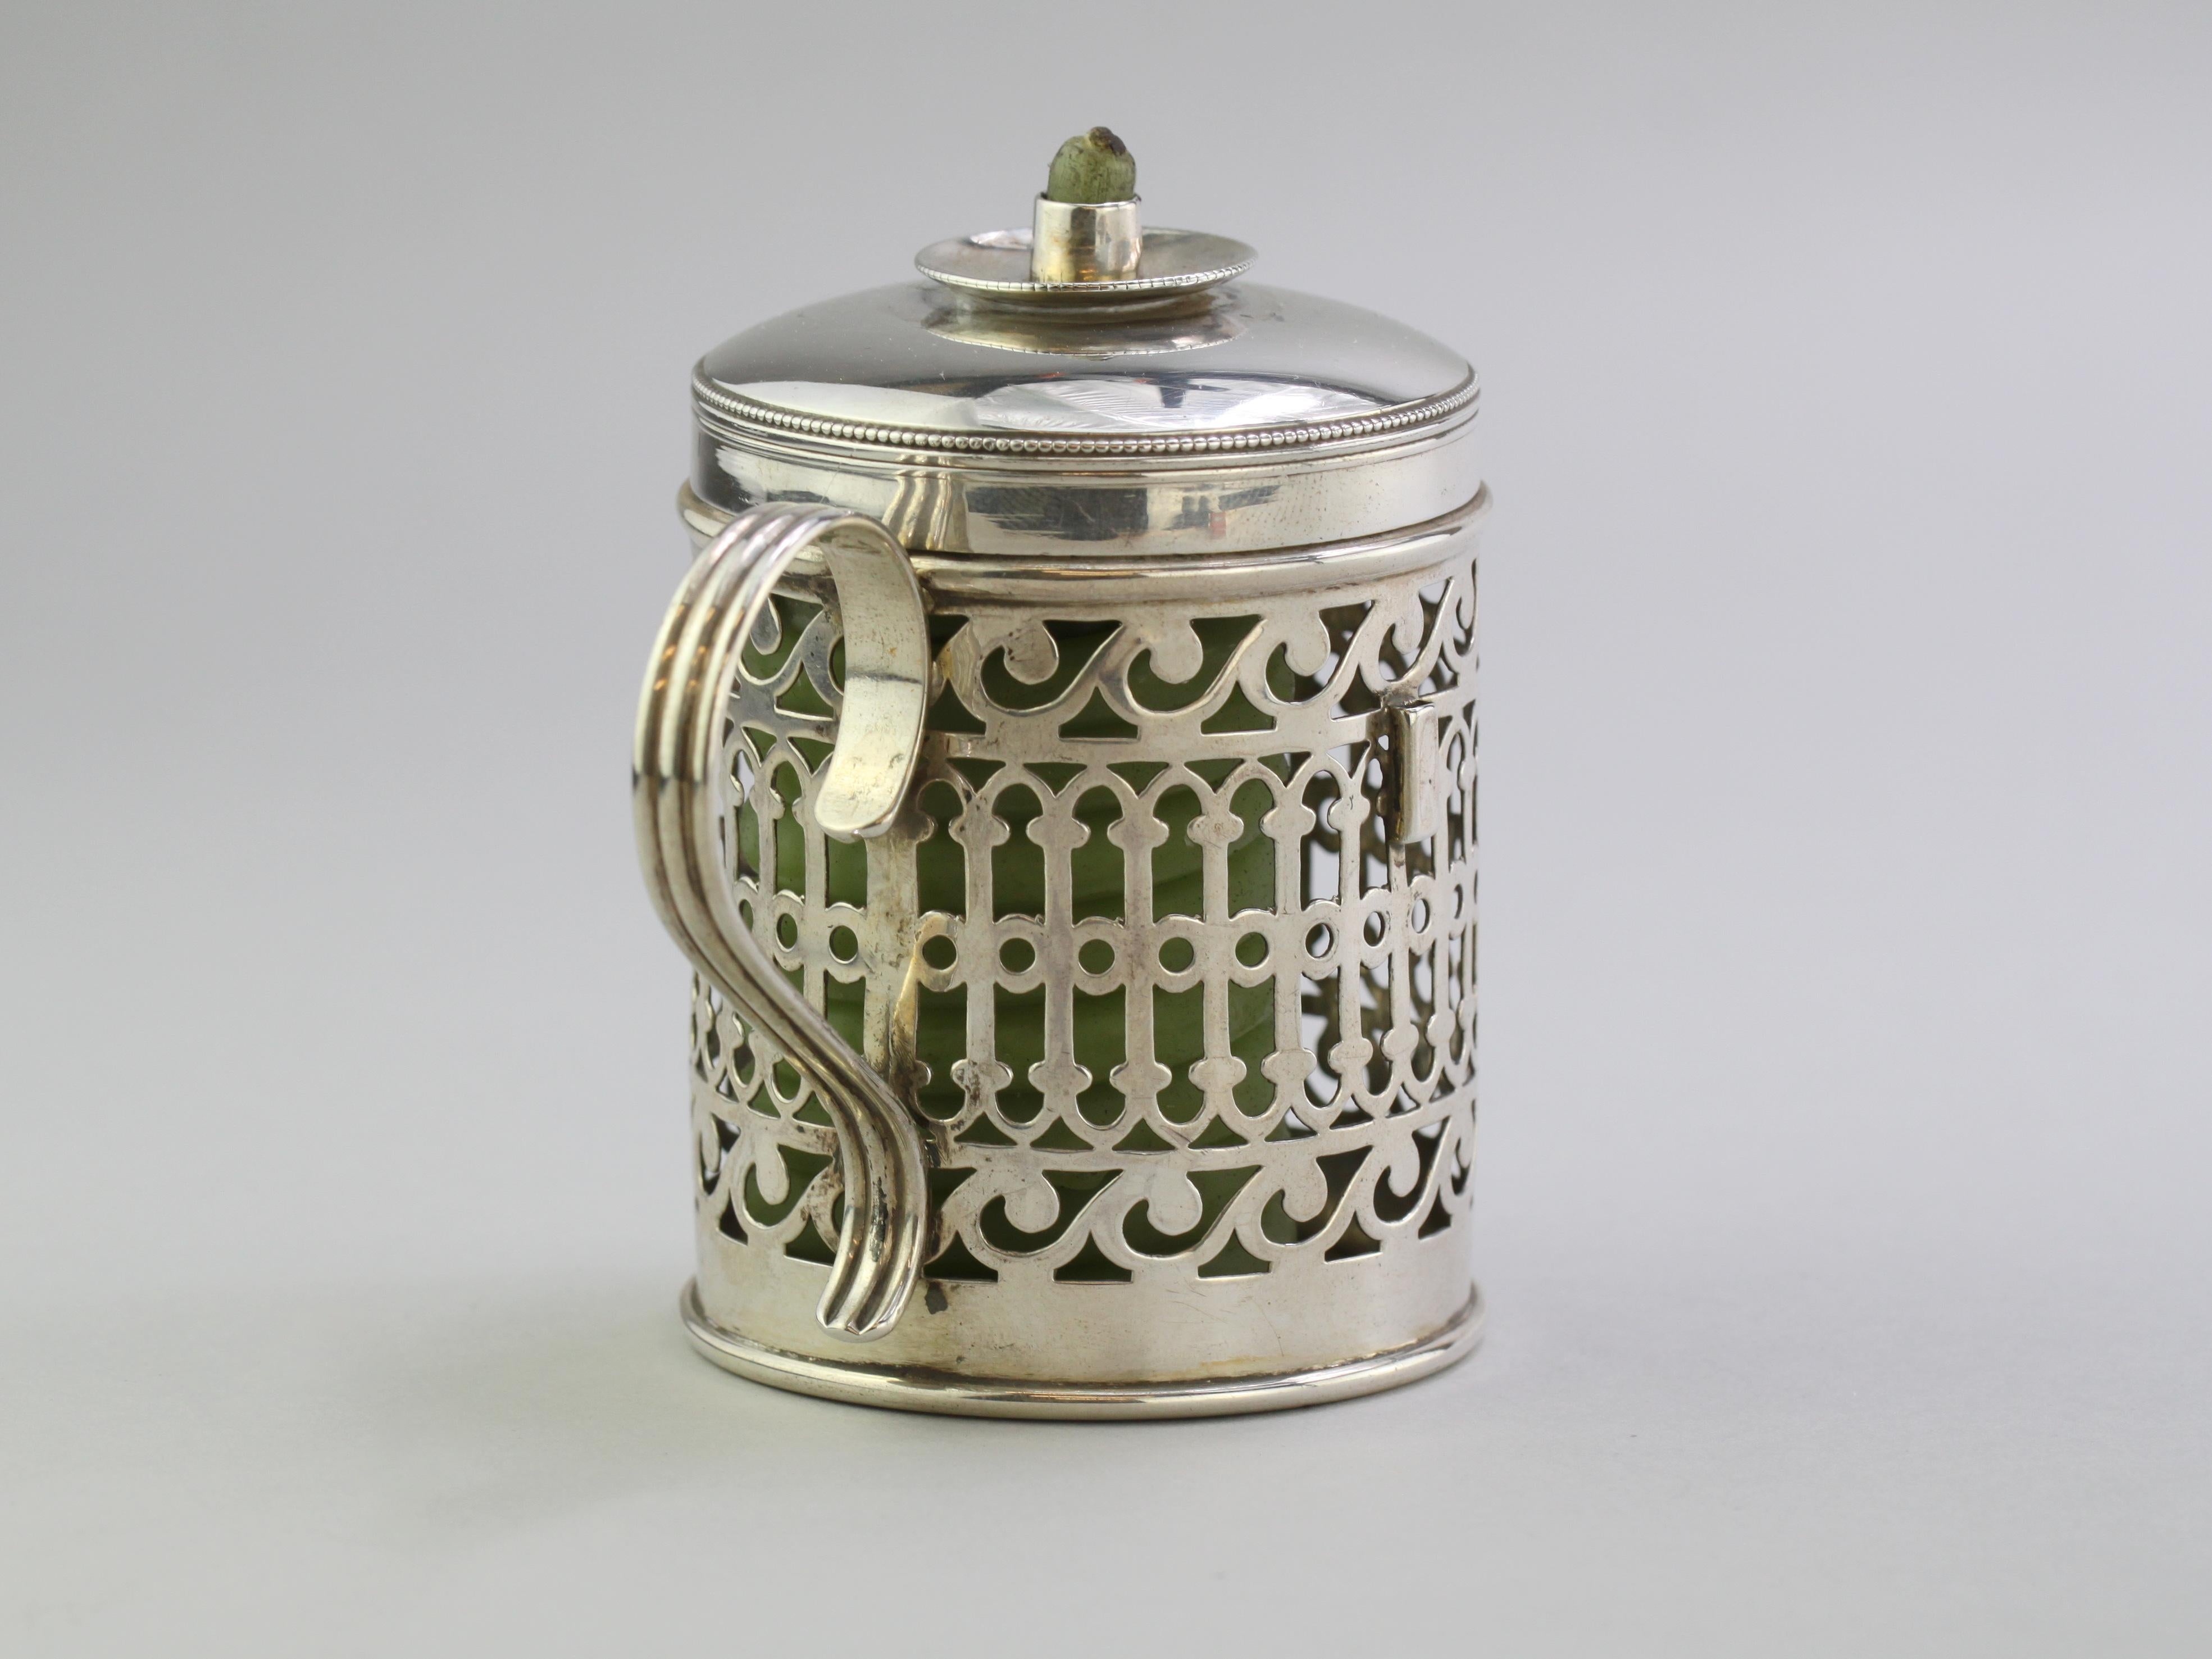 Antique Victorian sterling silver lighter / candleholder
Maker: James Dixon & Sons Ltd
Made in Sheffield, 1897
Fully hallmarked.

Dimensions:
Length 9.3 cm
Width 6.3 cm
Height 9.2 cm
Weight 166 grams

Condition: The item has minor wear